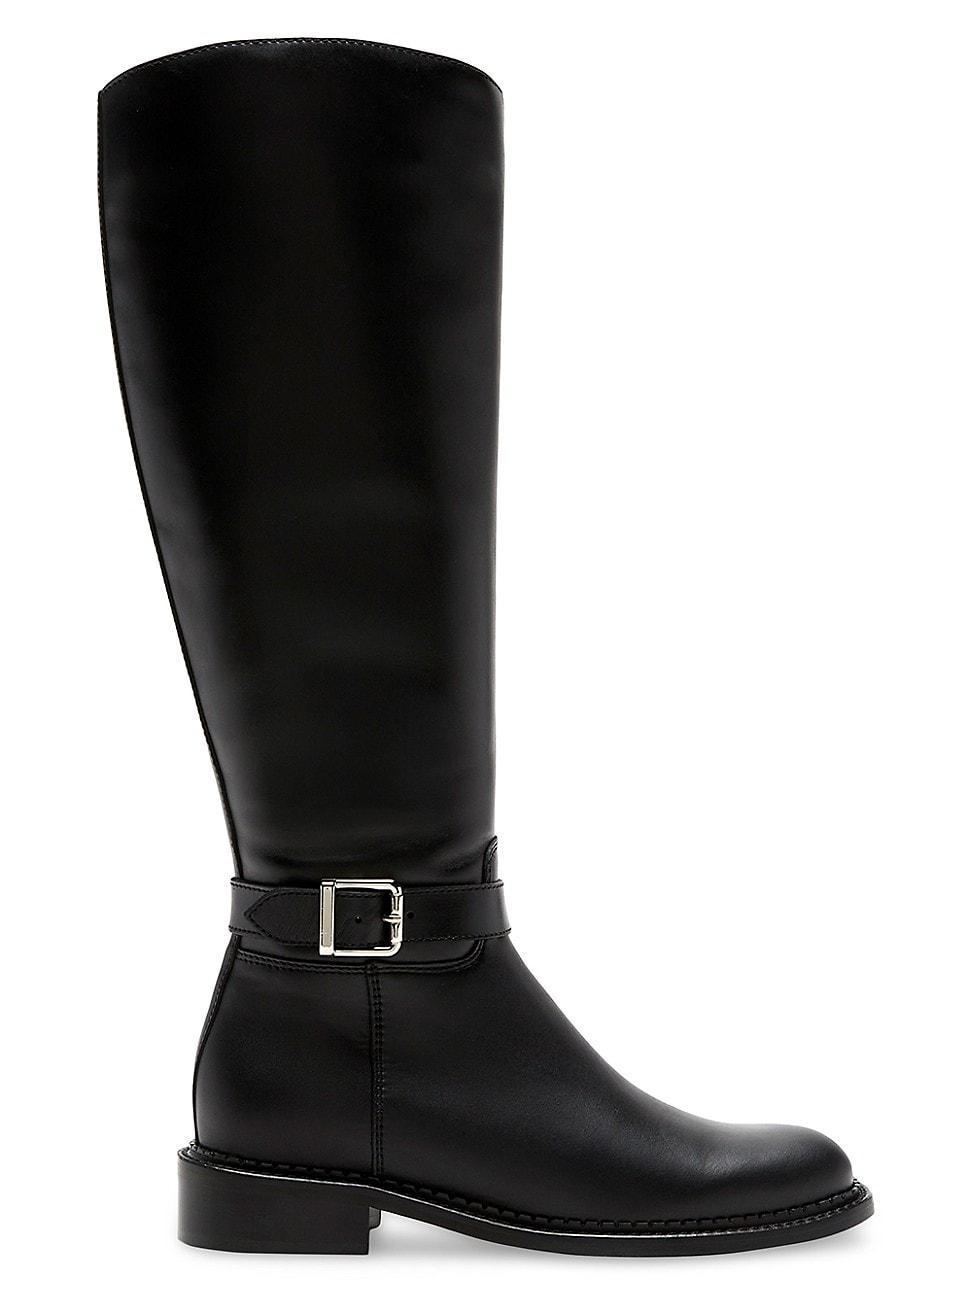 La Canadienne Stevie Mid Calf Boot Product Image